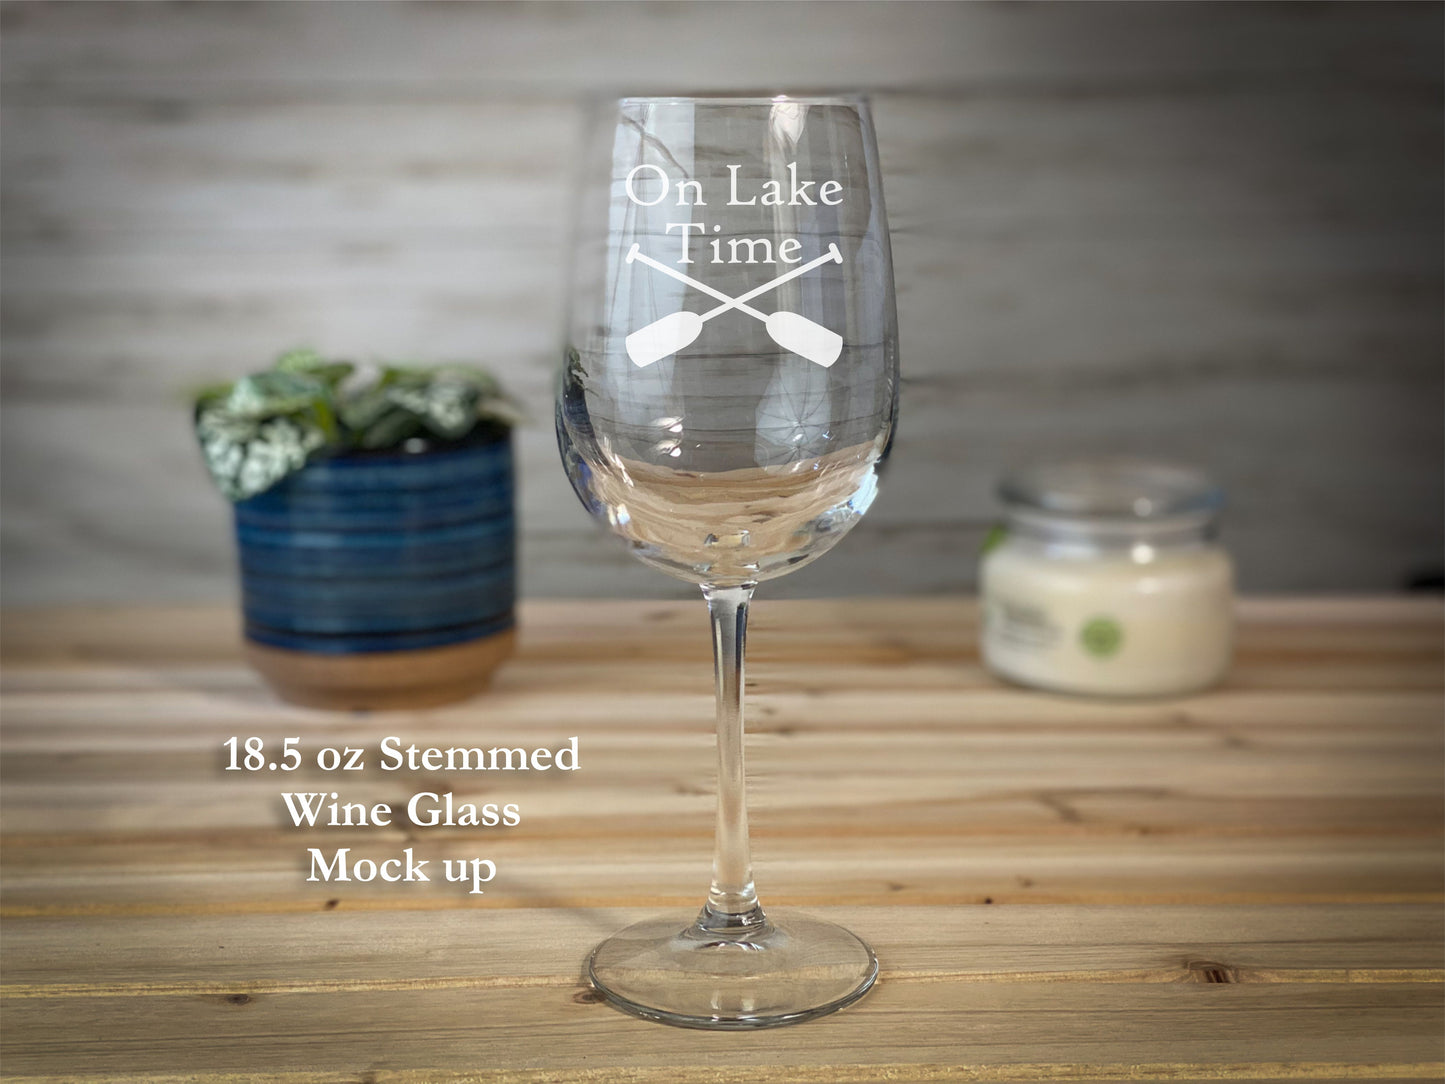 On Lake Time with Paddles - 18.5 oz Stemmed Wine Glass